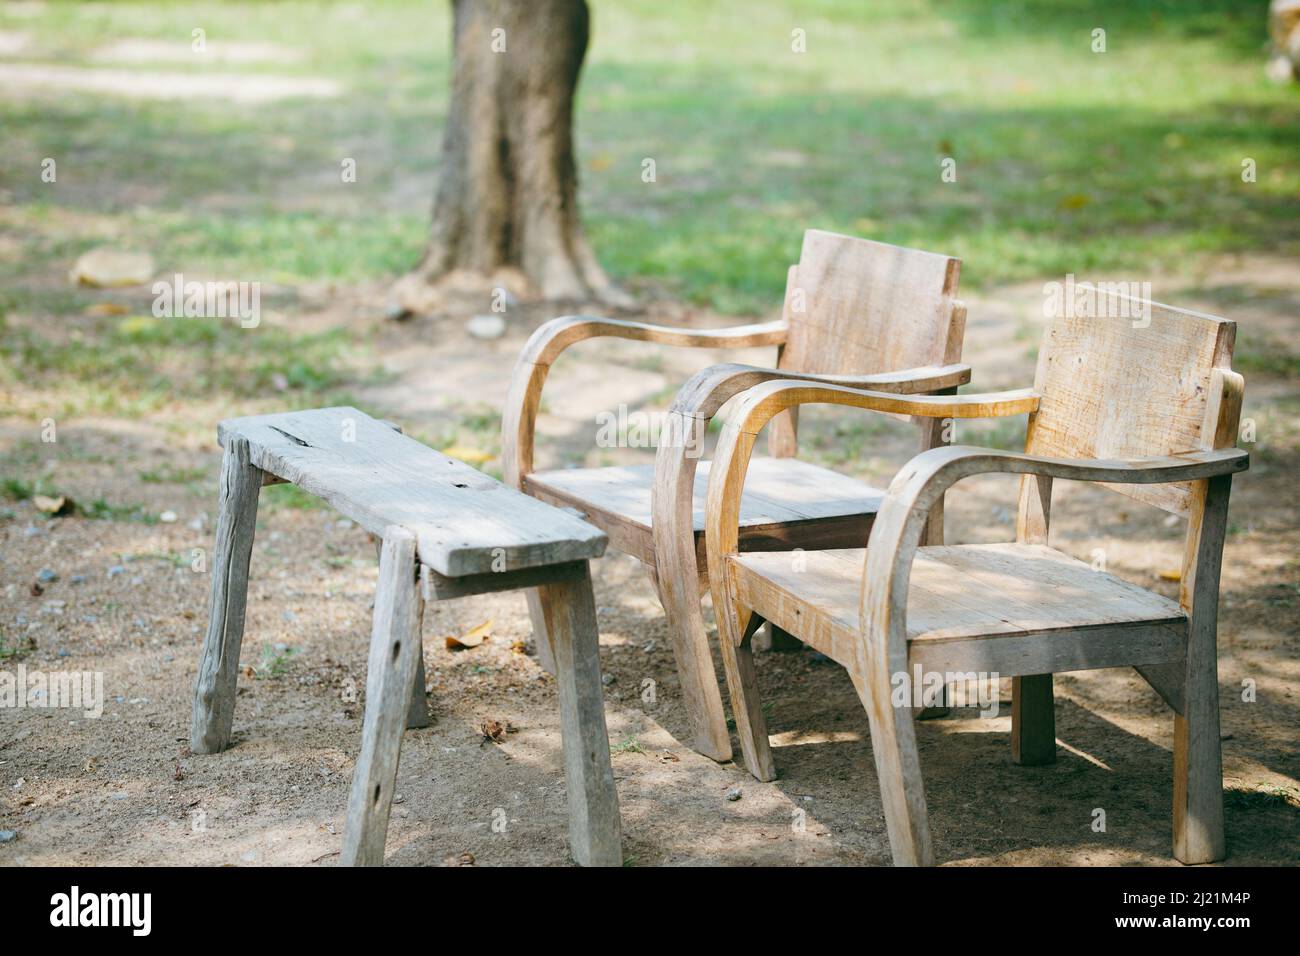 old wooden seat chair in garden park Stock Photo